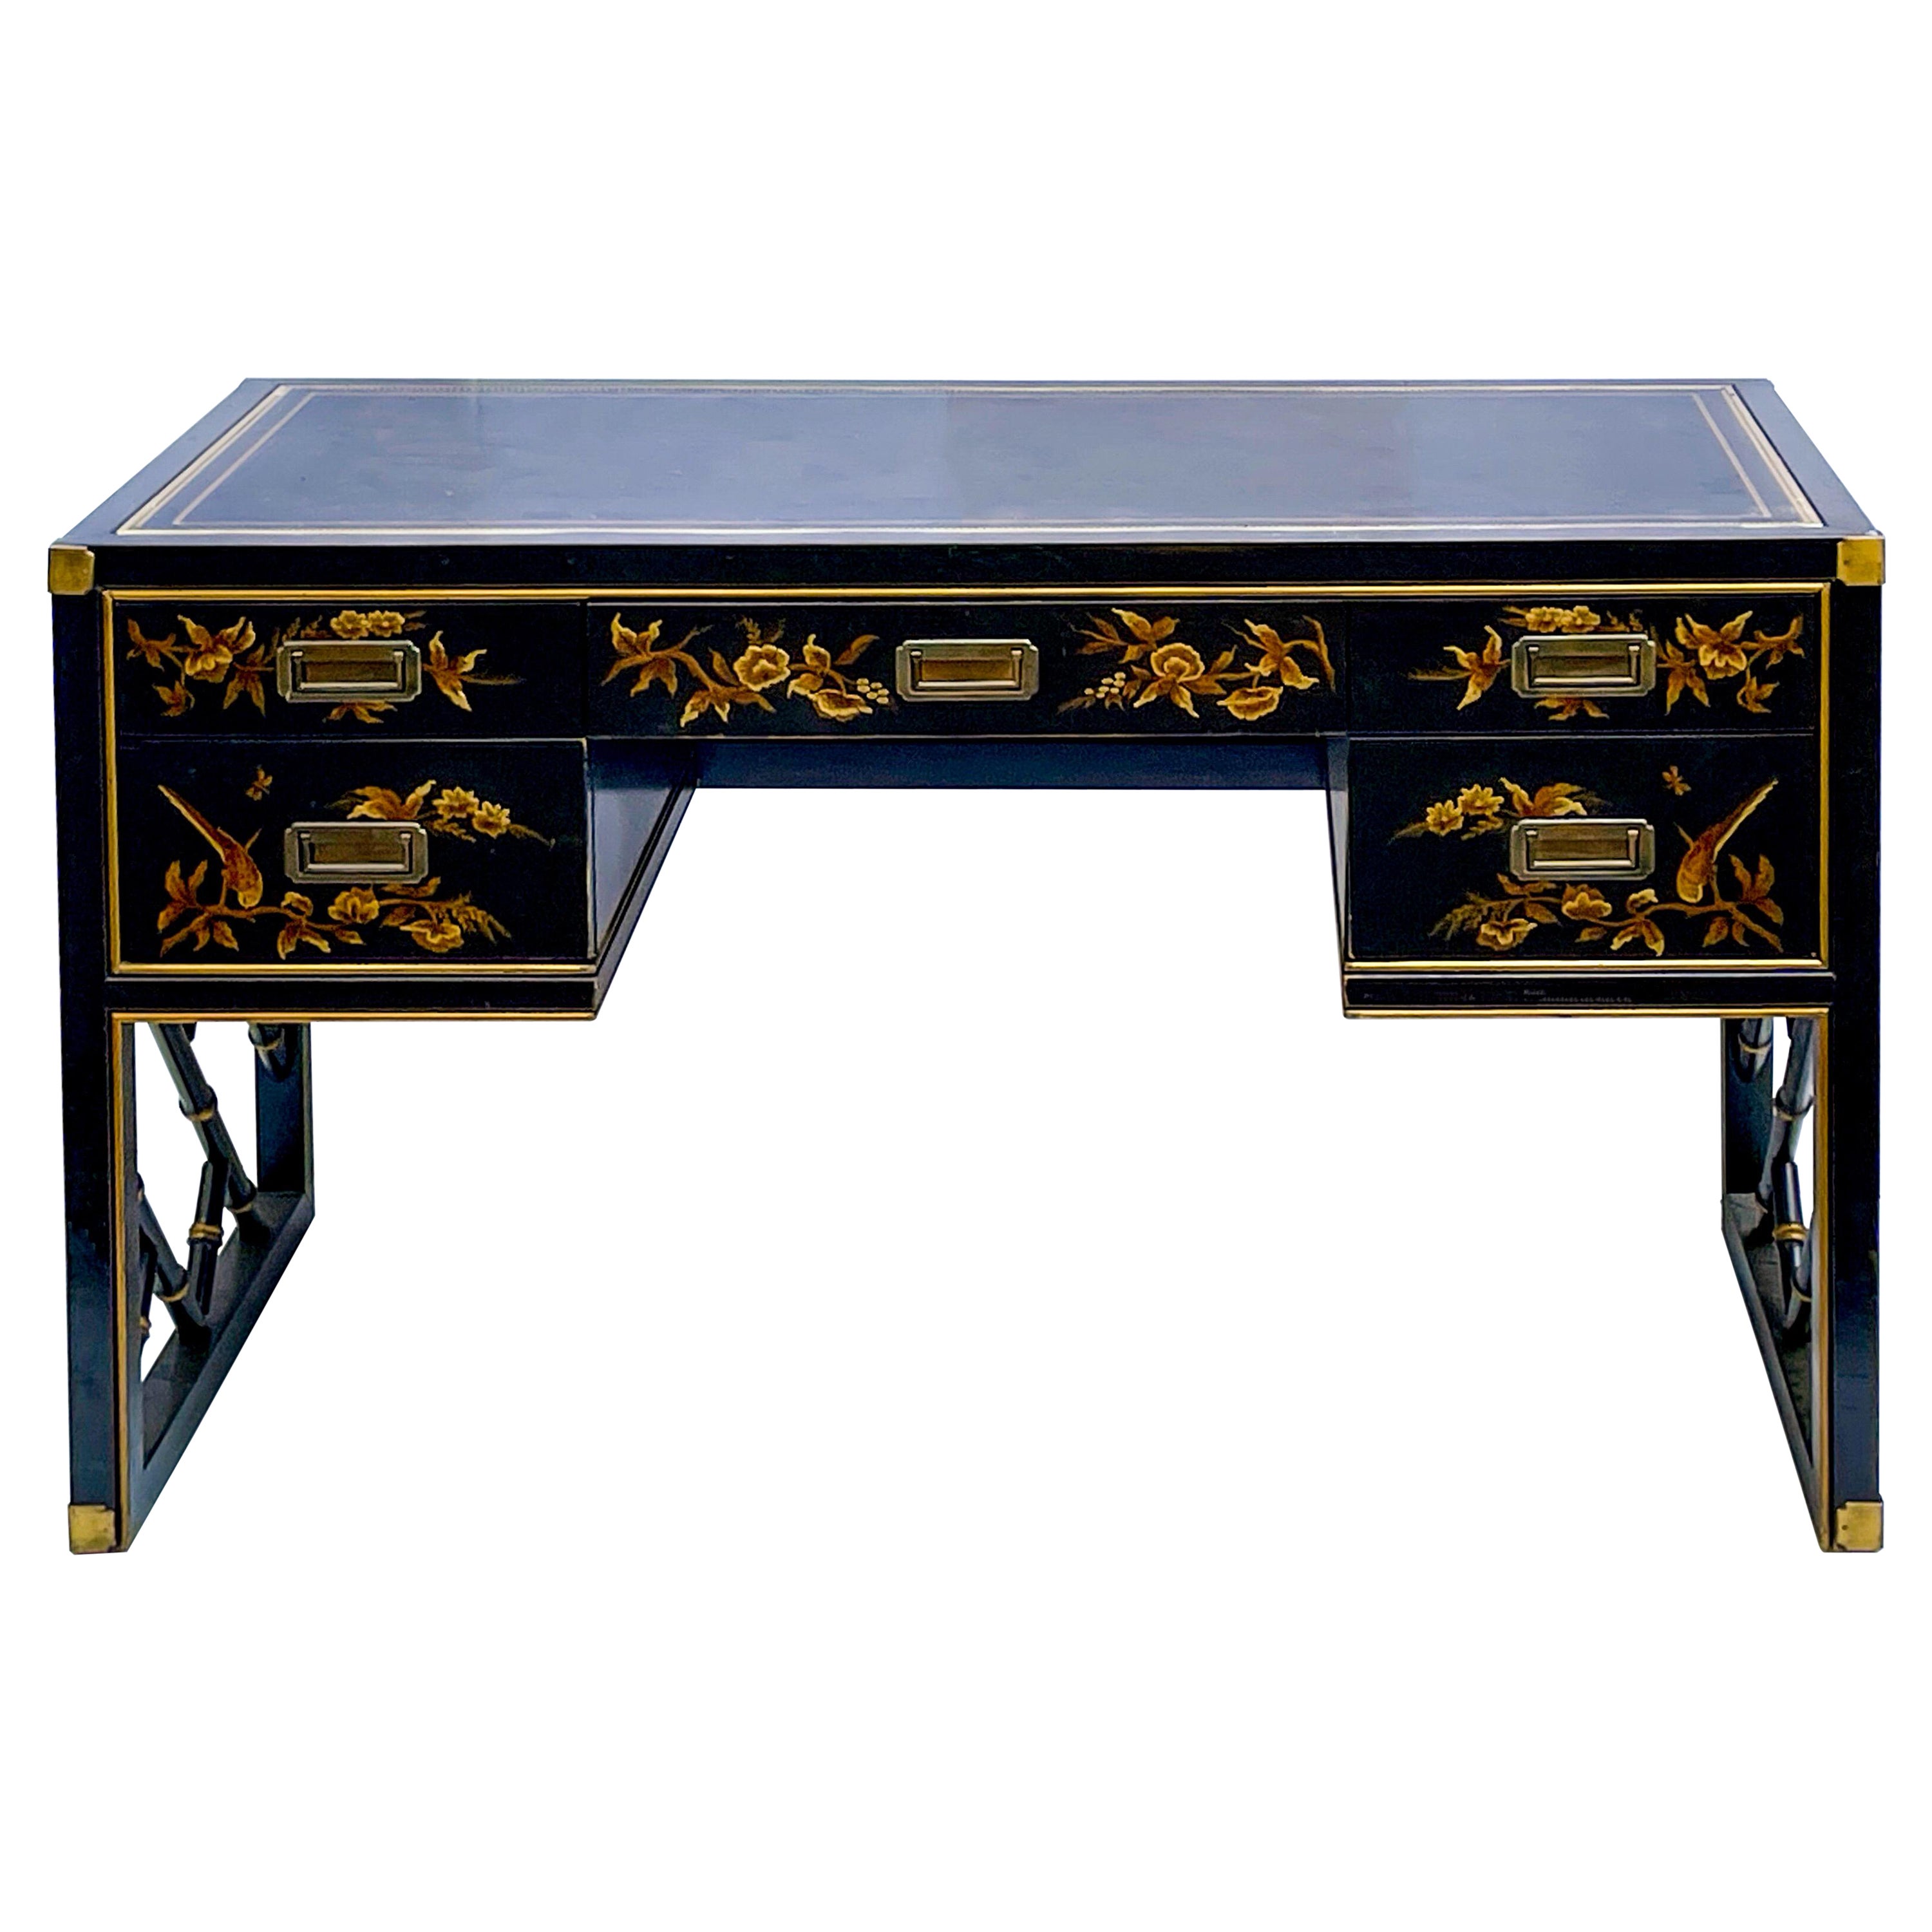 1970s Chinoiserie and Faux Bamboo Campaign Style Leather Top Desk by Sligh